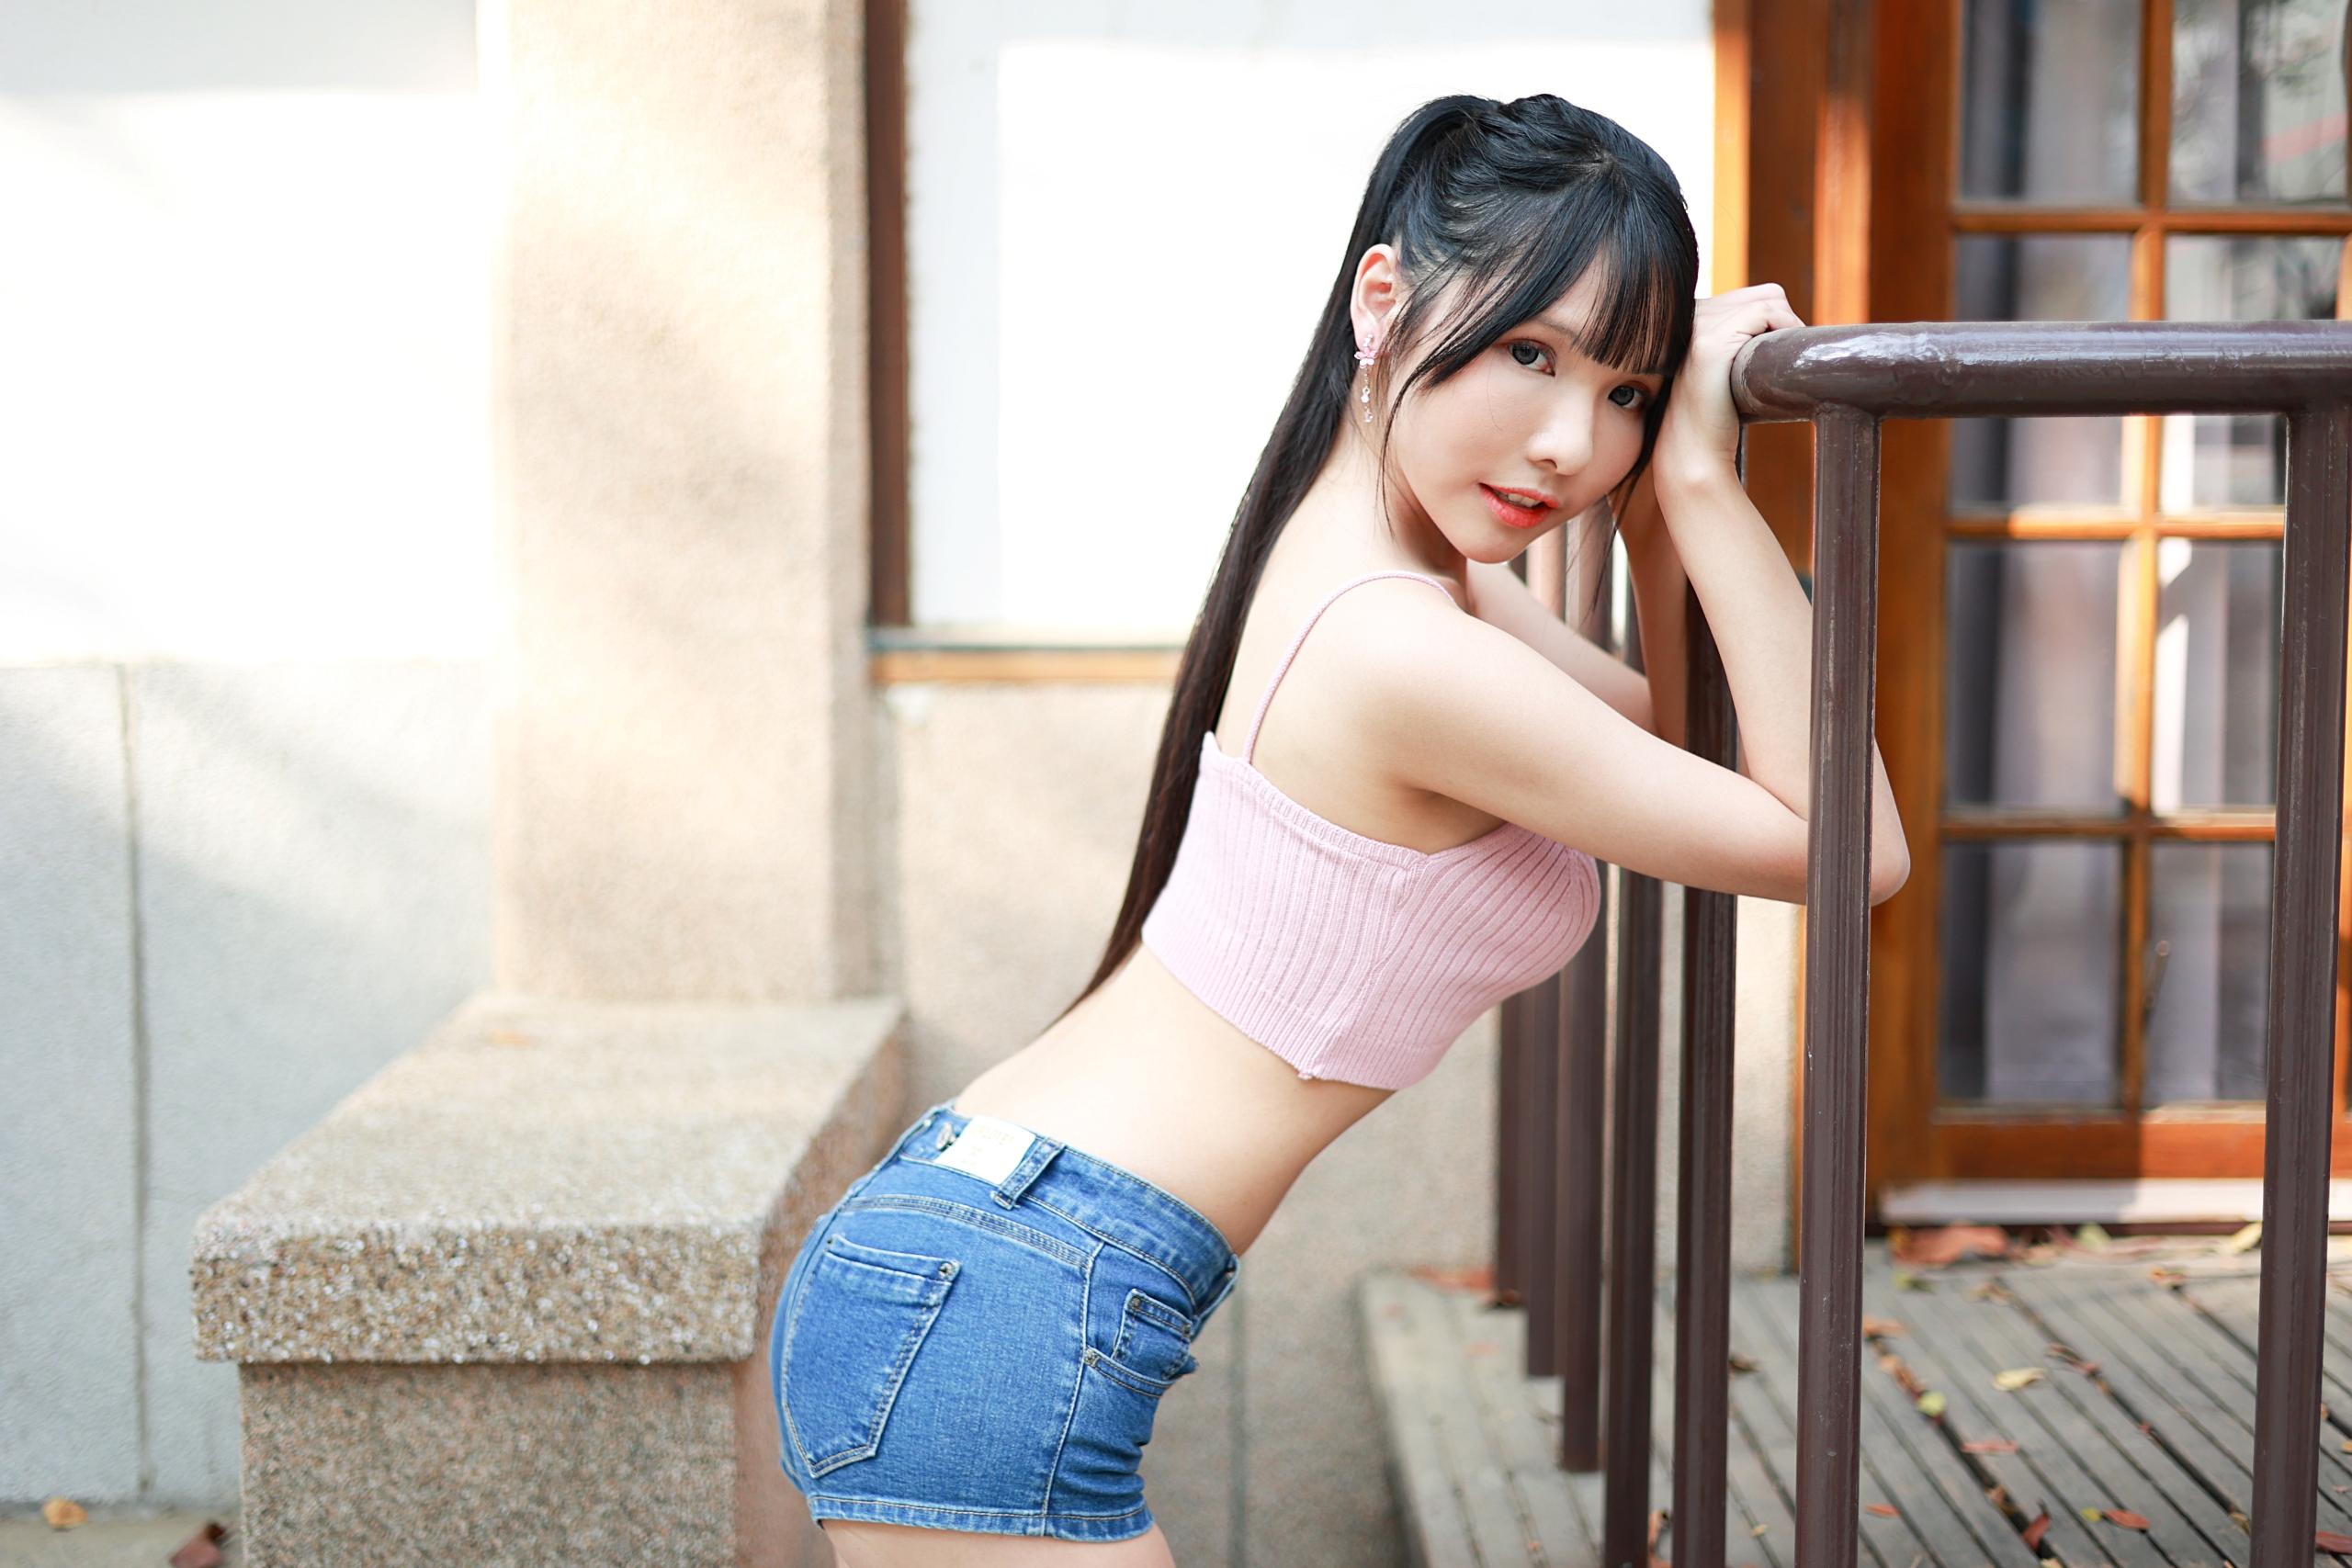 Chinese outdoor public